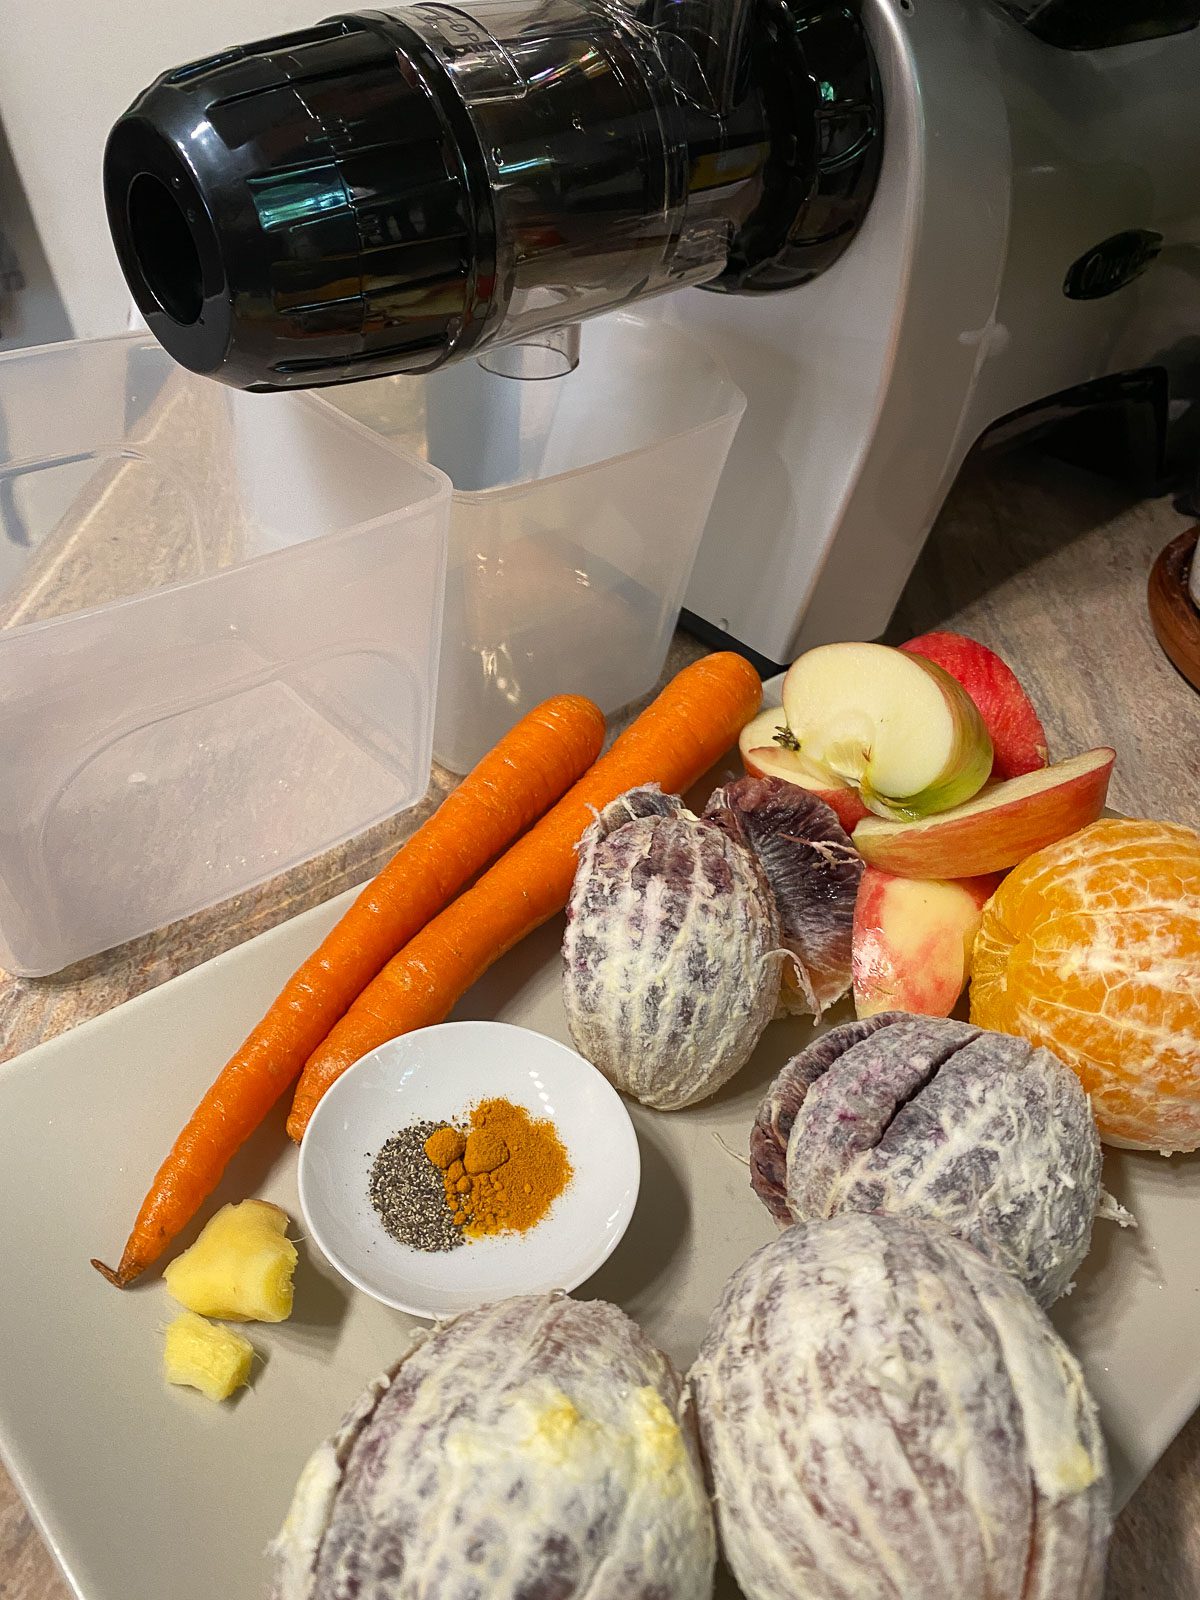 ingredients for Immunity Boosting Juice spread out on a white surface alongside a juicer